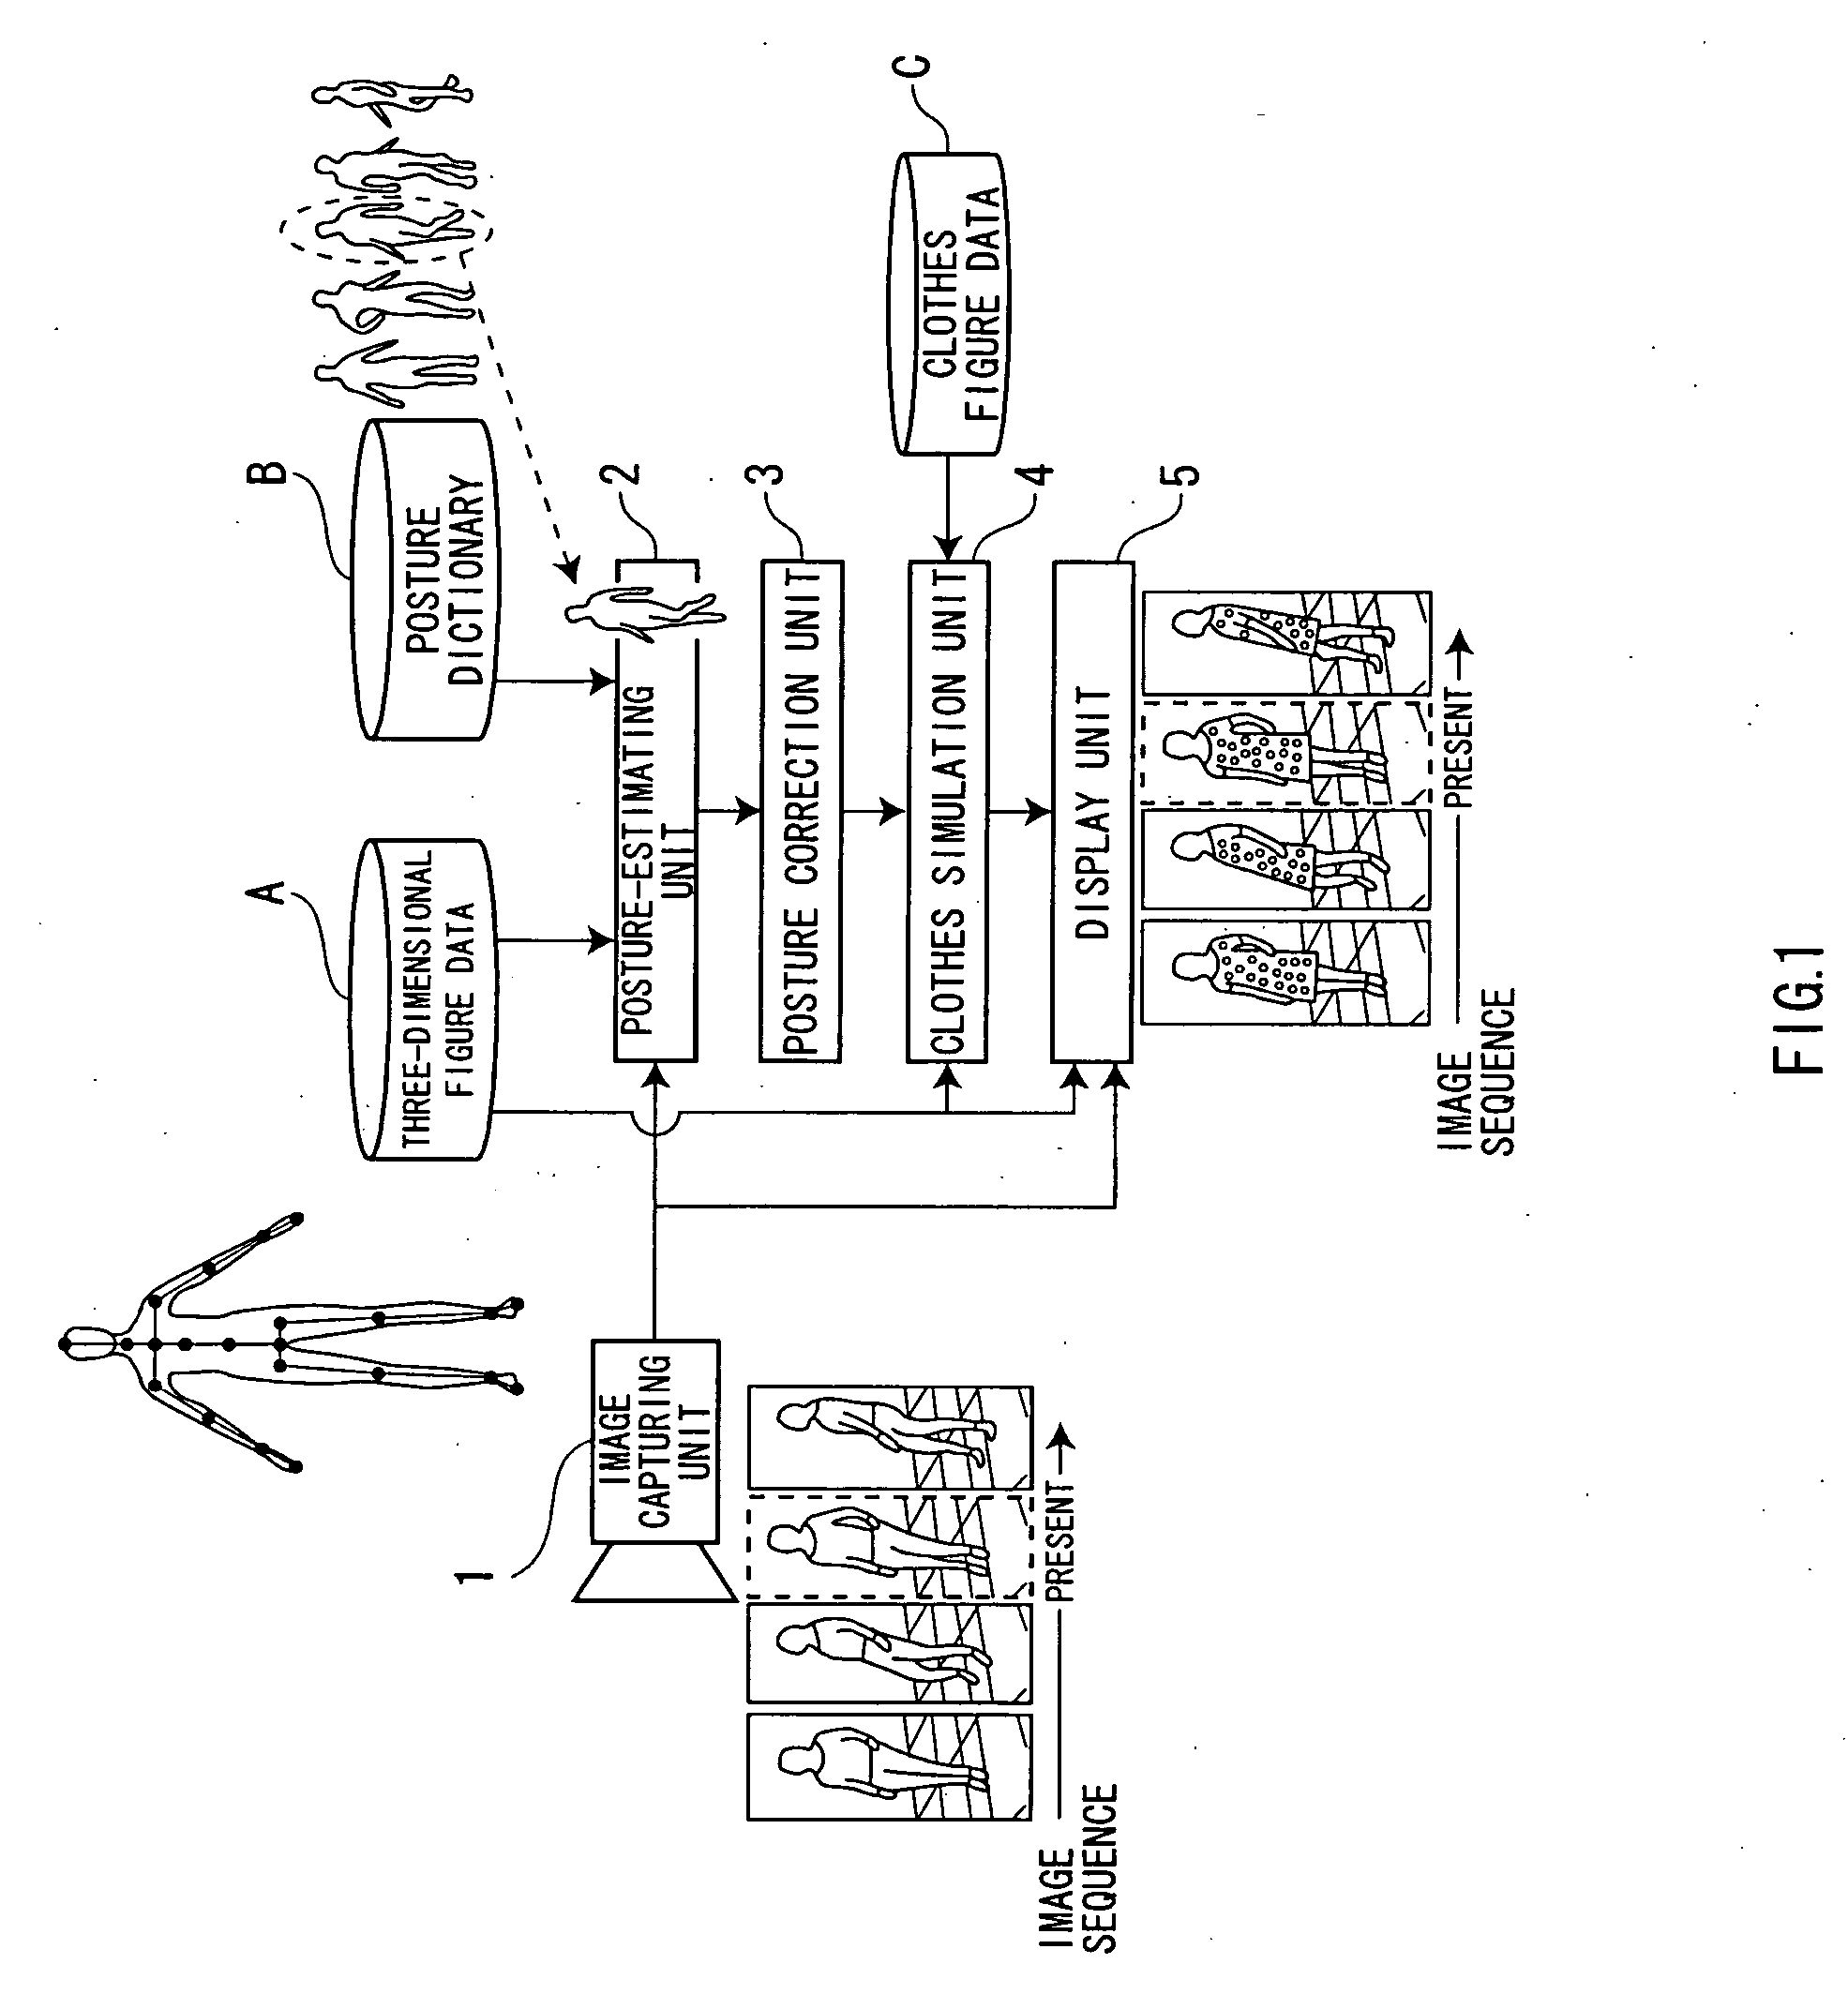 Virtual clothing modeling apparatus and method